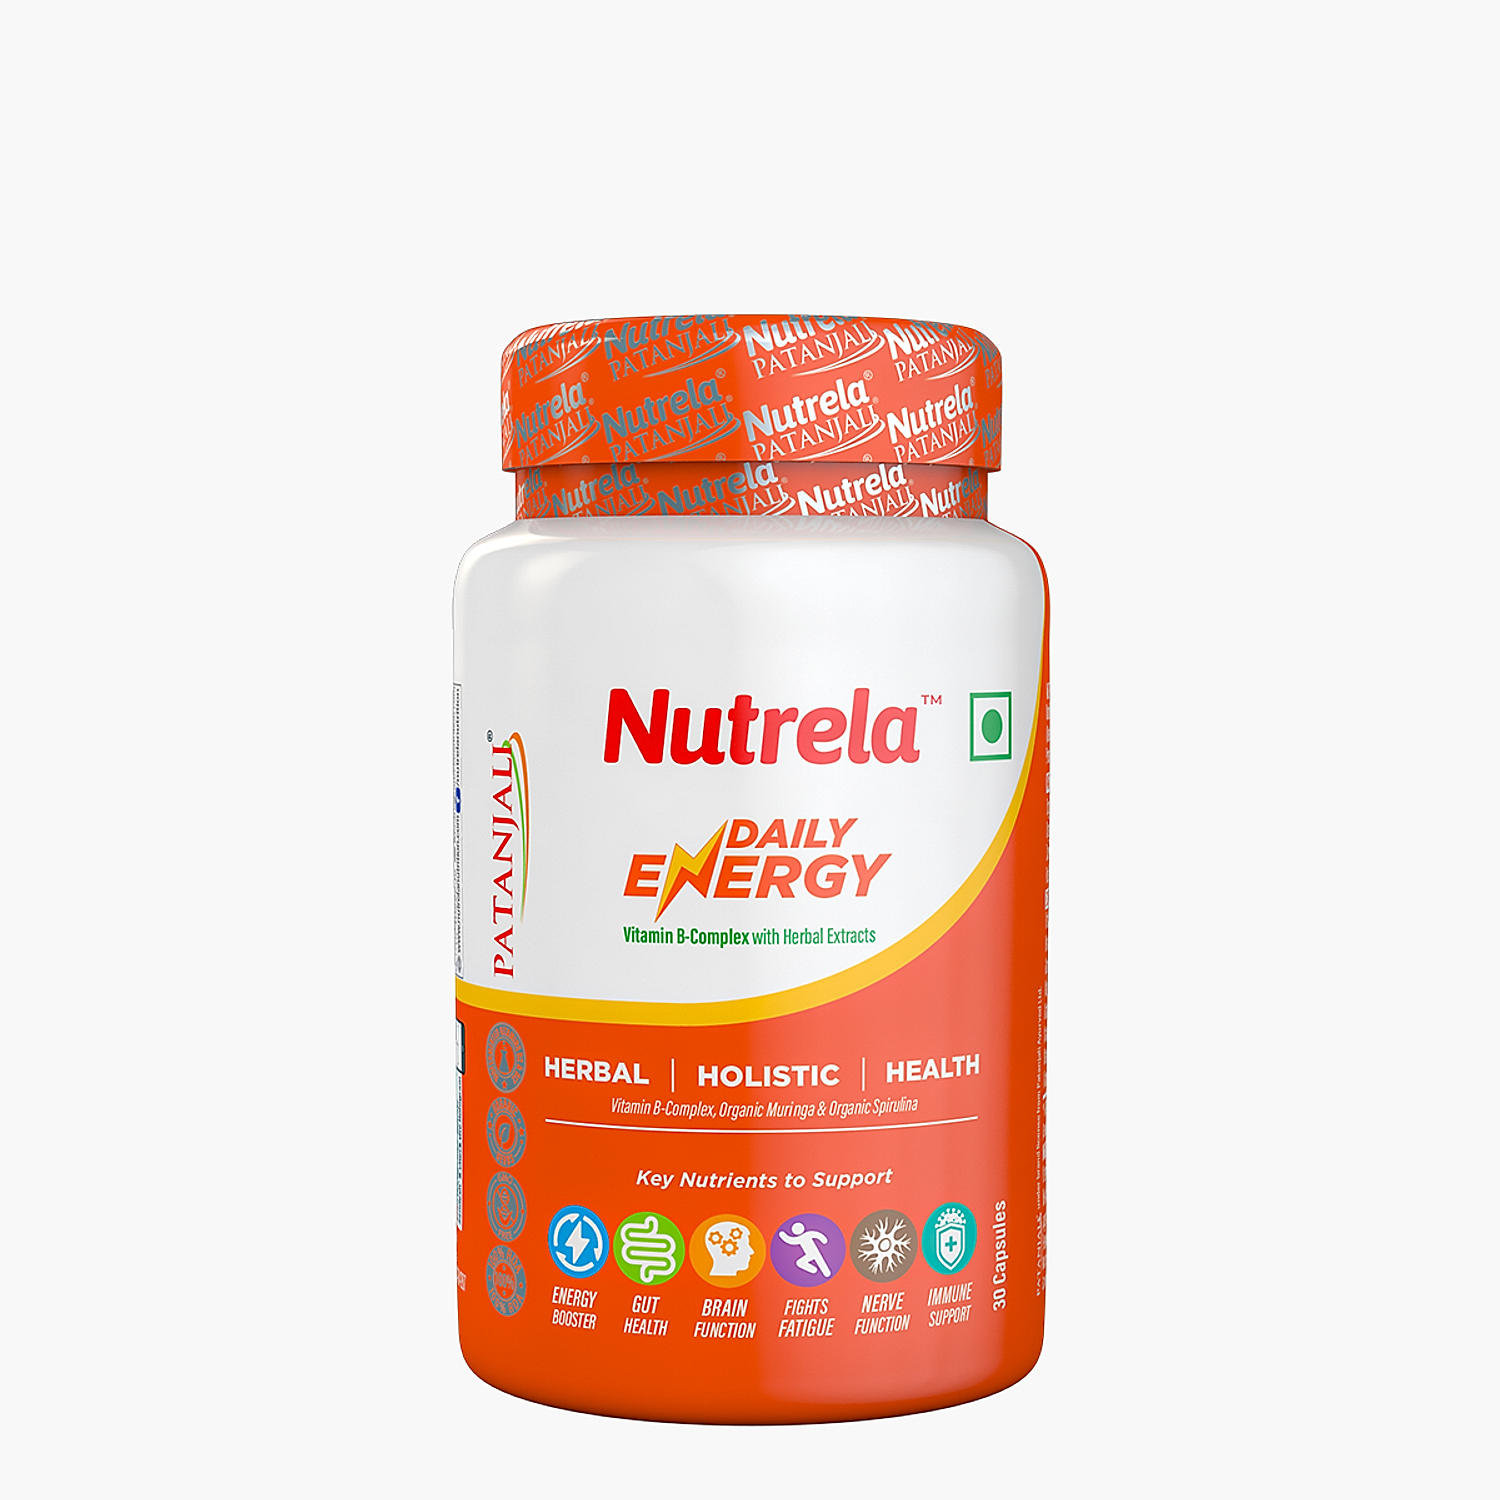 Patanjali Nutrela Daily Energy - Organic B Complex Capsules (Pack of 1) 